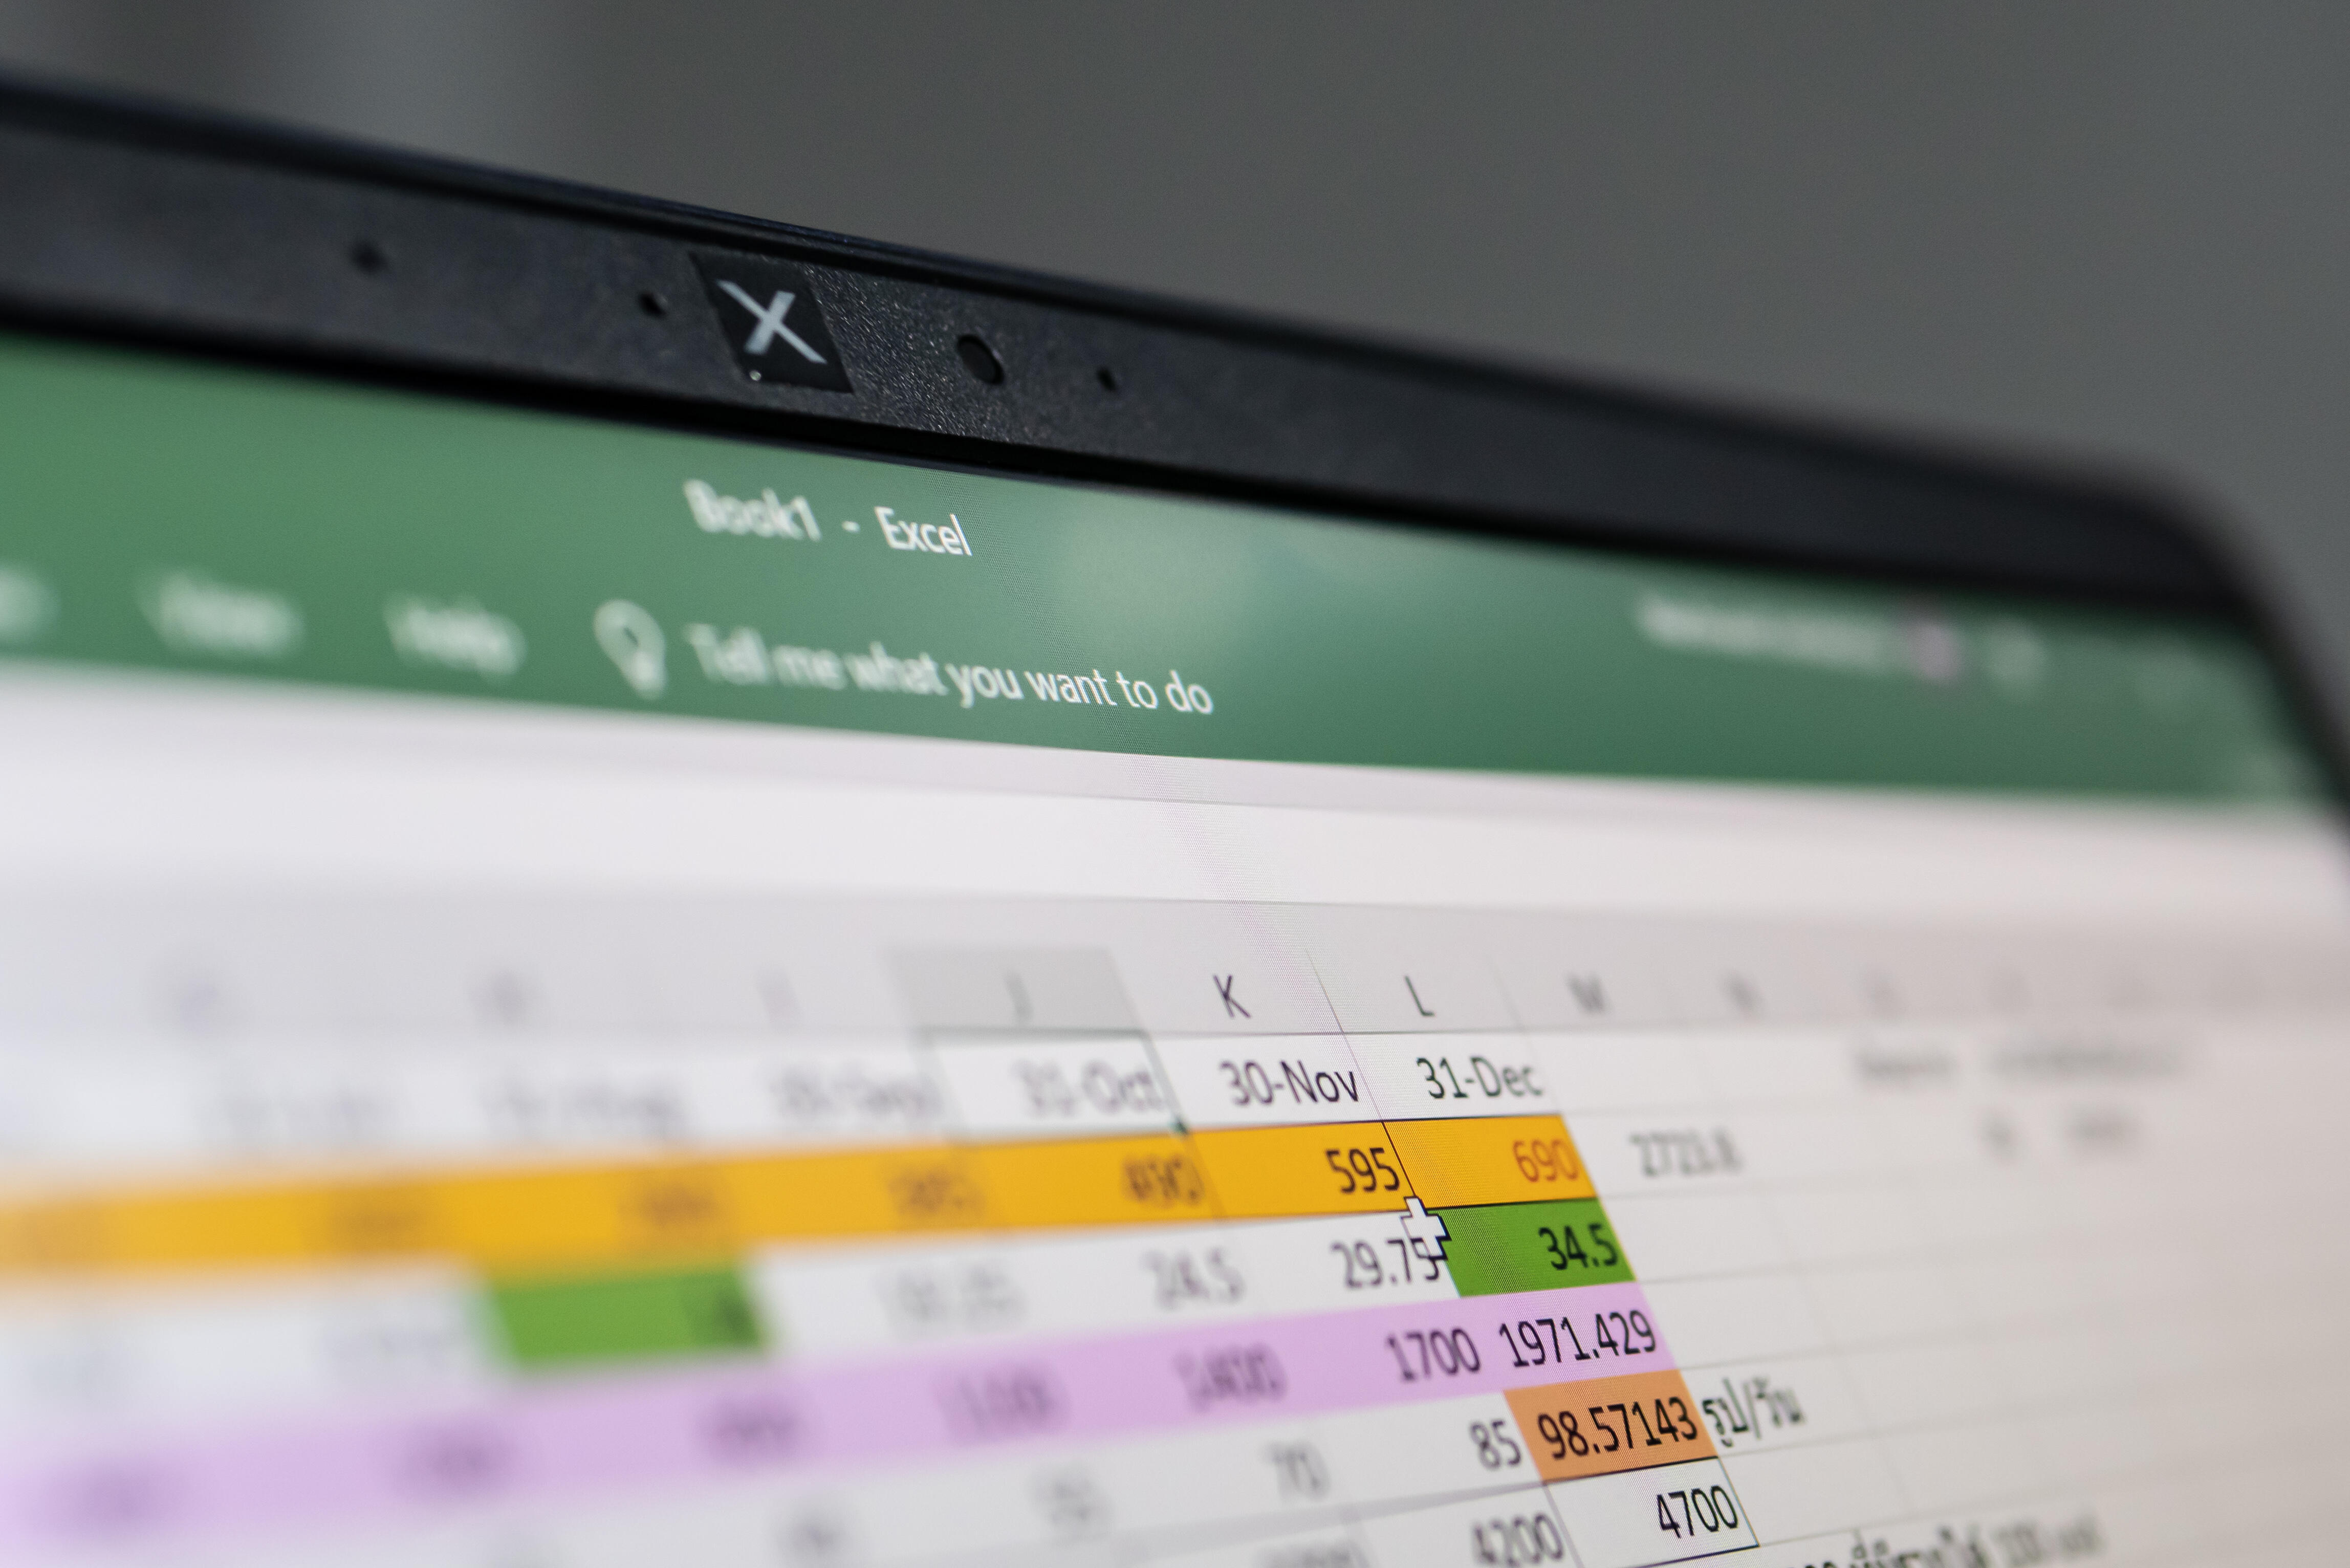 How to use XLOOKUP() to find commission benchmarks in Excel